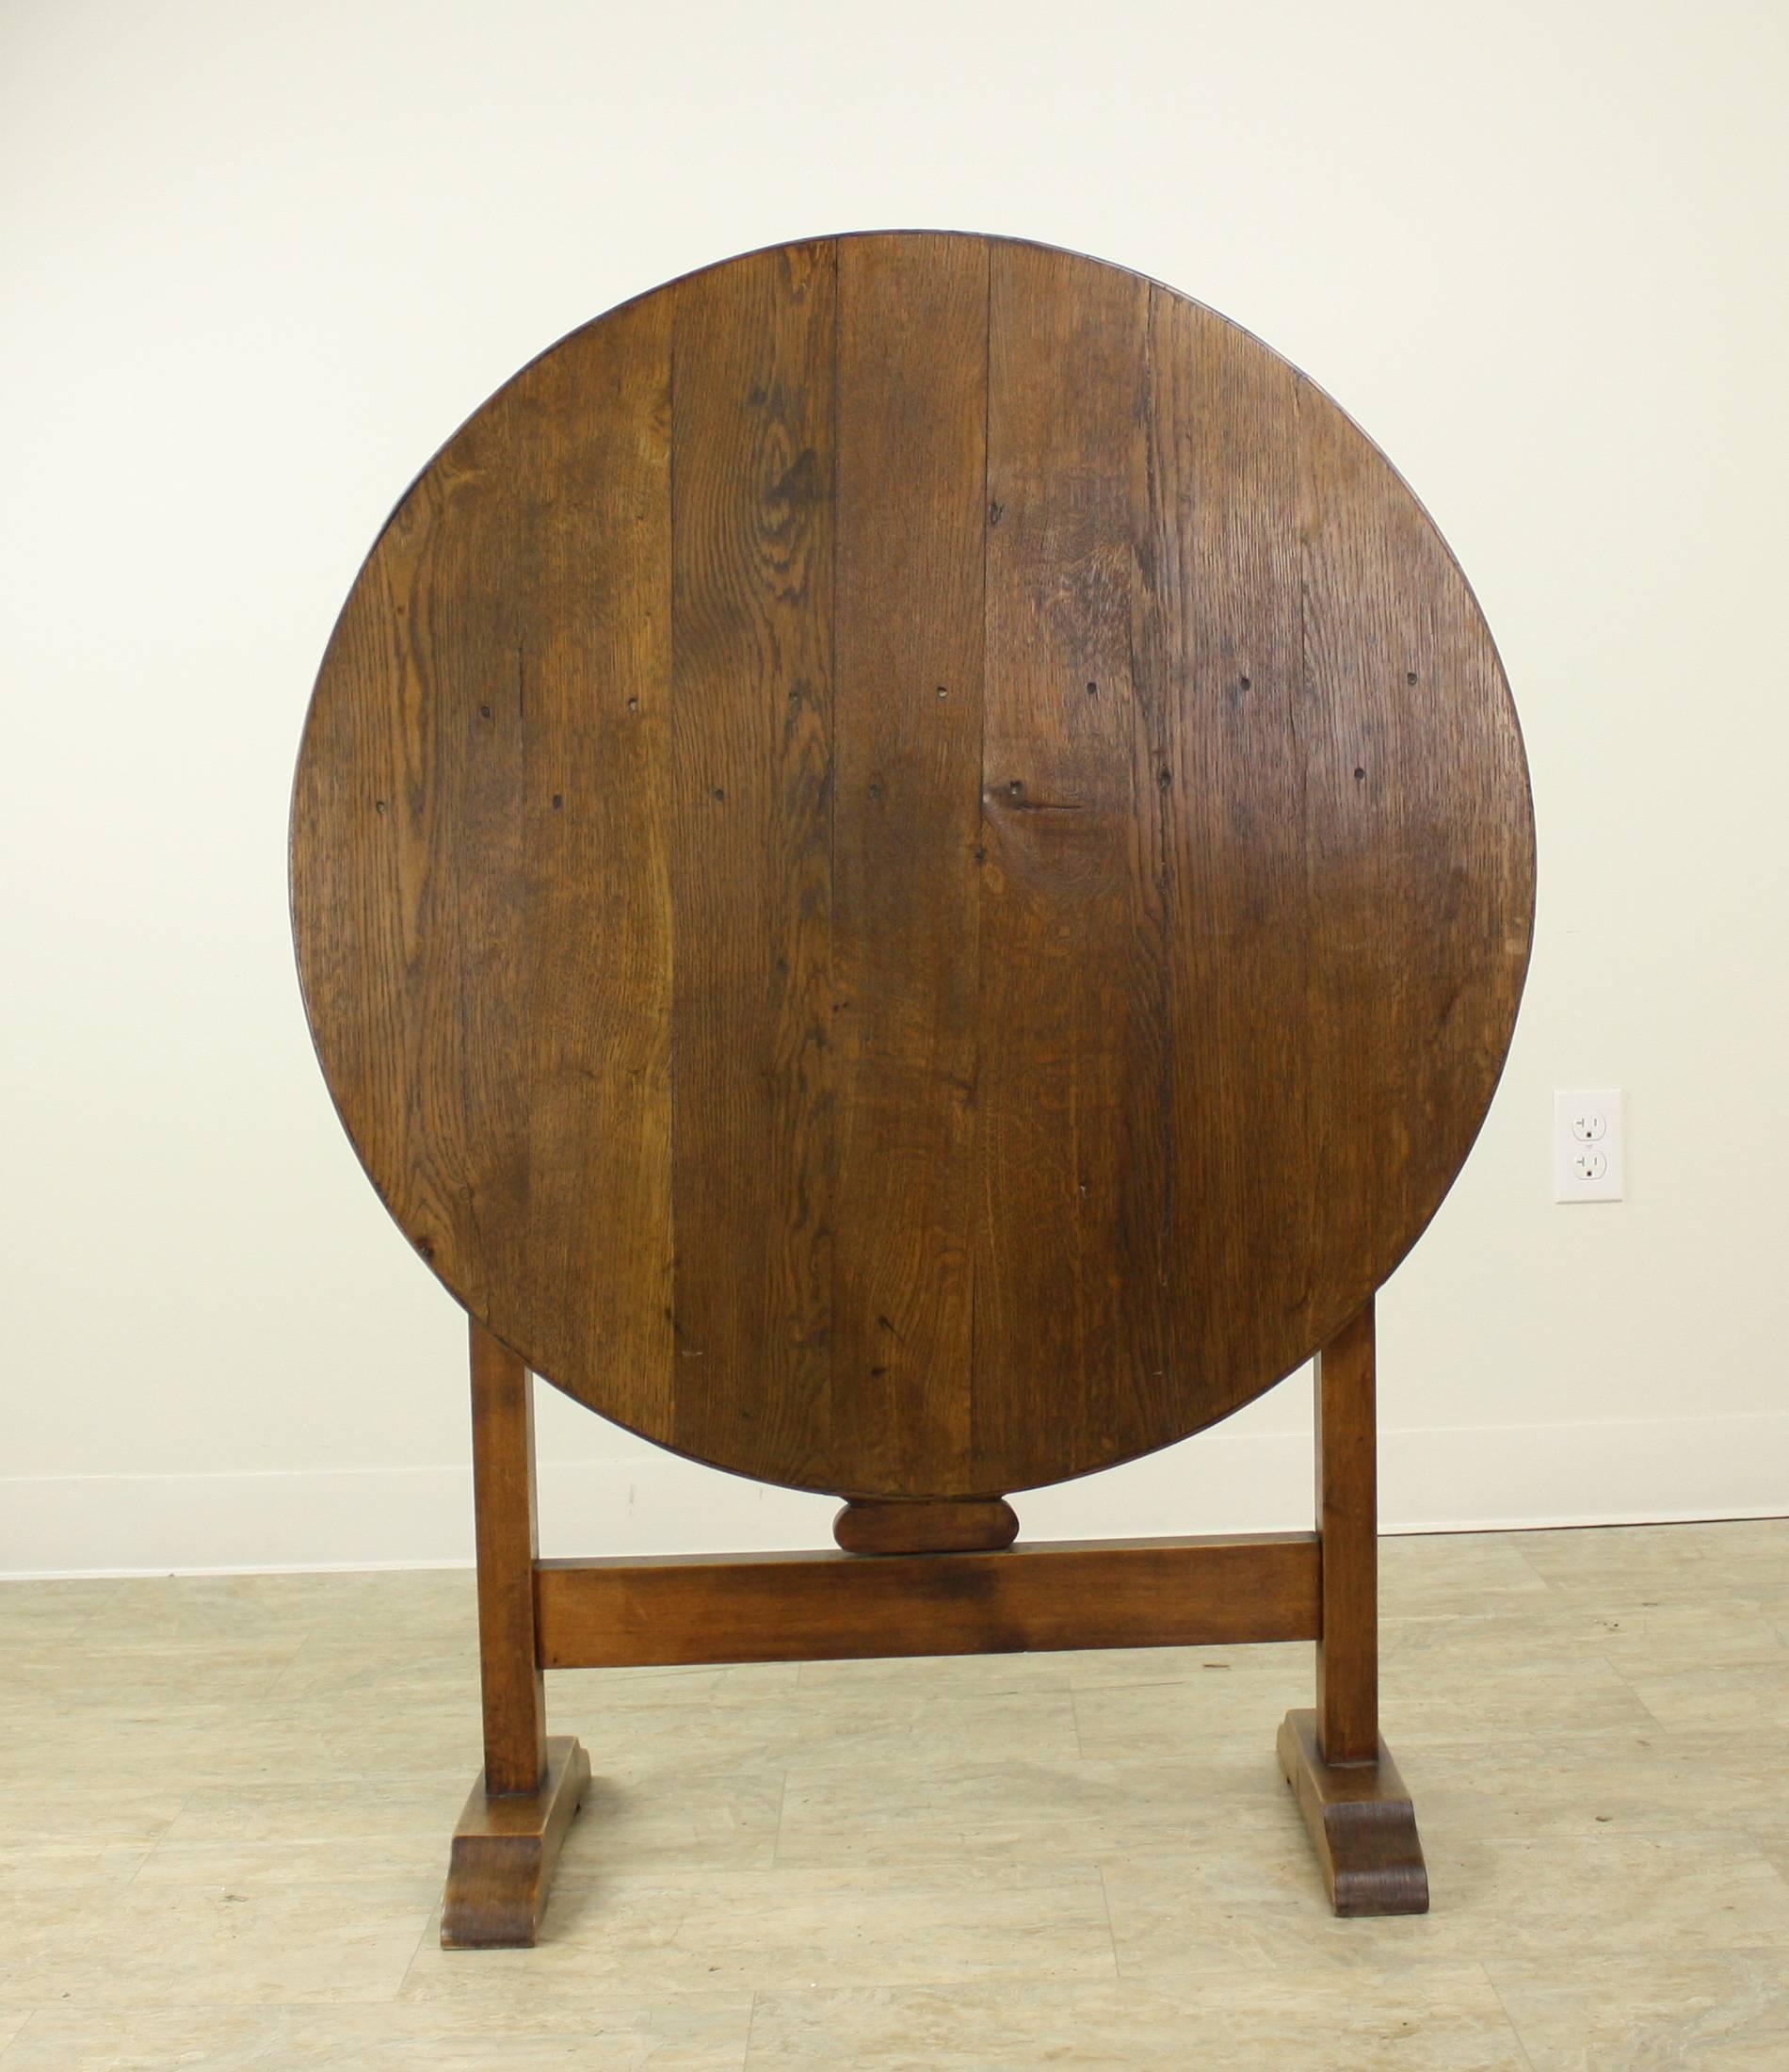 This wine tasting table, also known a vendange table in the vineyards of France, is a charming example, as it is quite small, and could be utilized as an end table or a smaller breakfast table. It would be a lovely center hall table also. As is